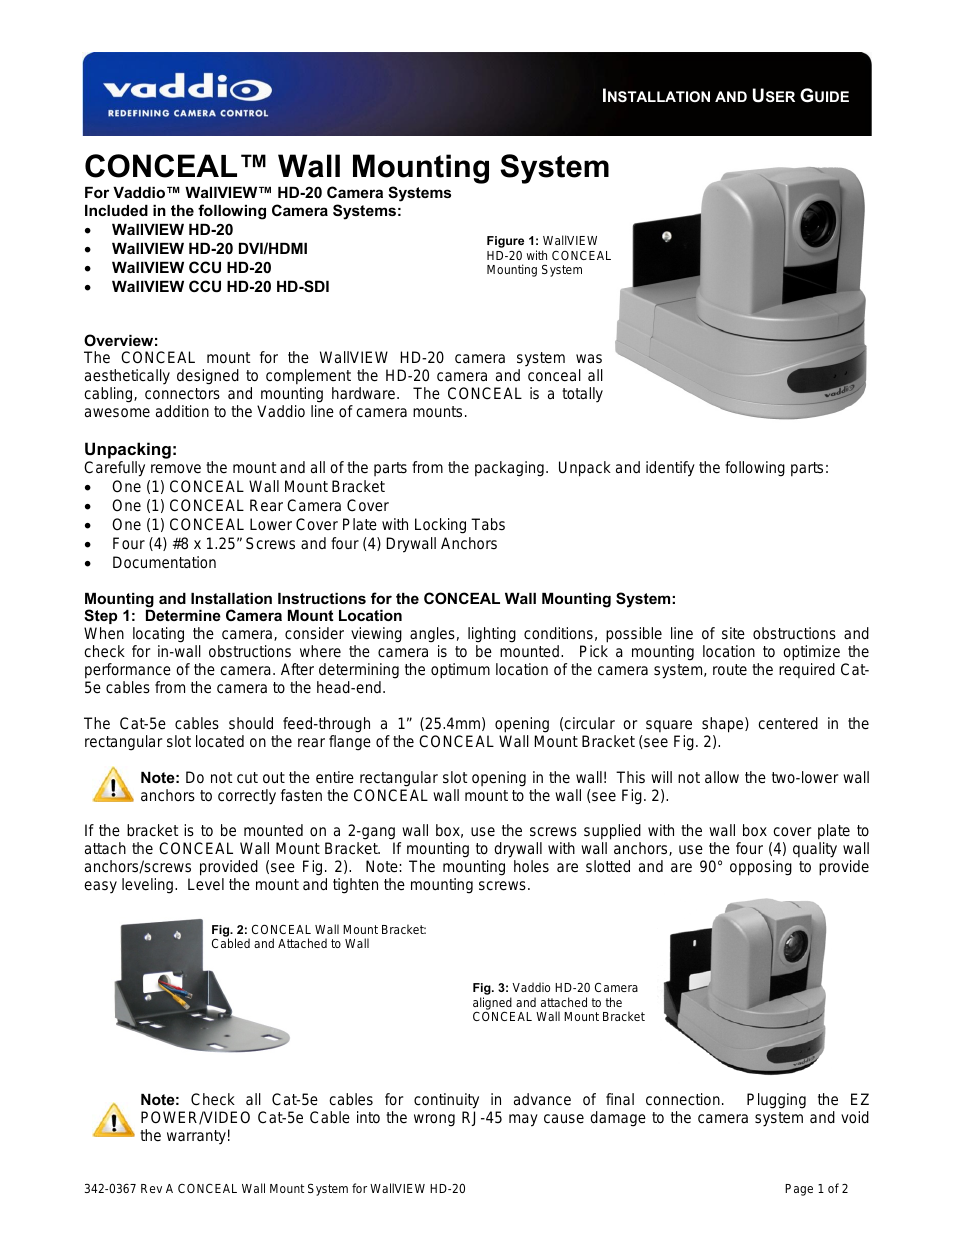 CONCEAL Wall Mounting System for WallVIEW HD-20